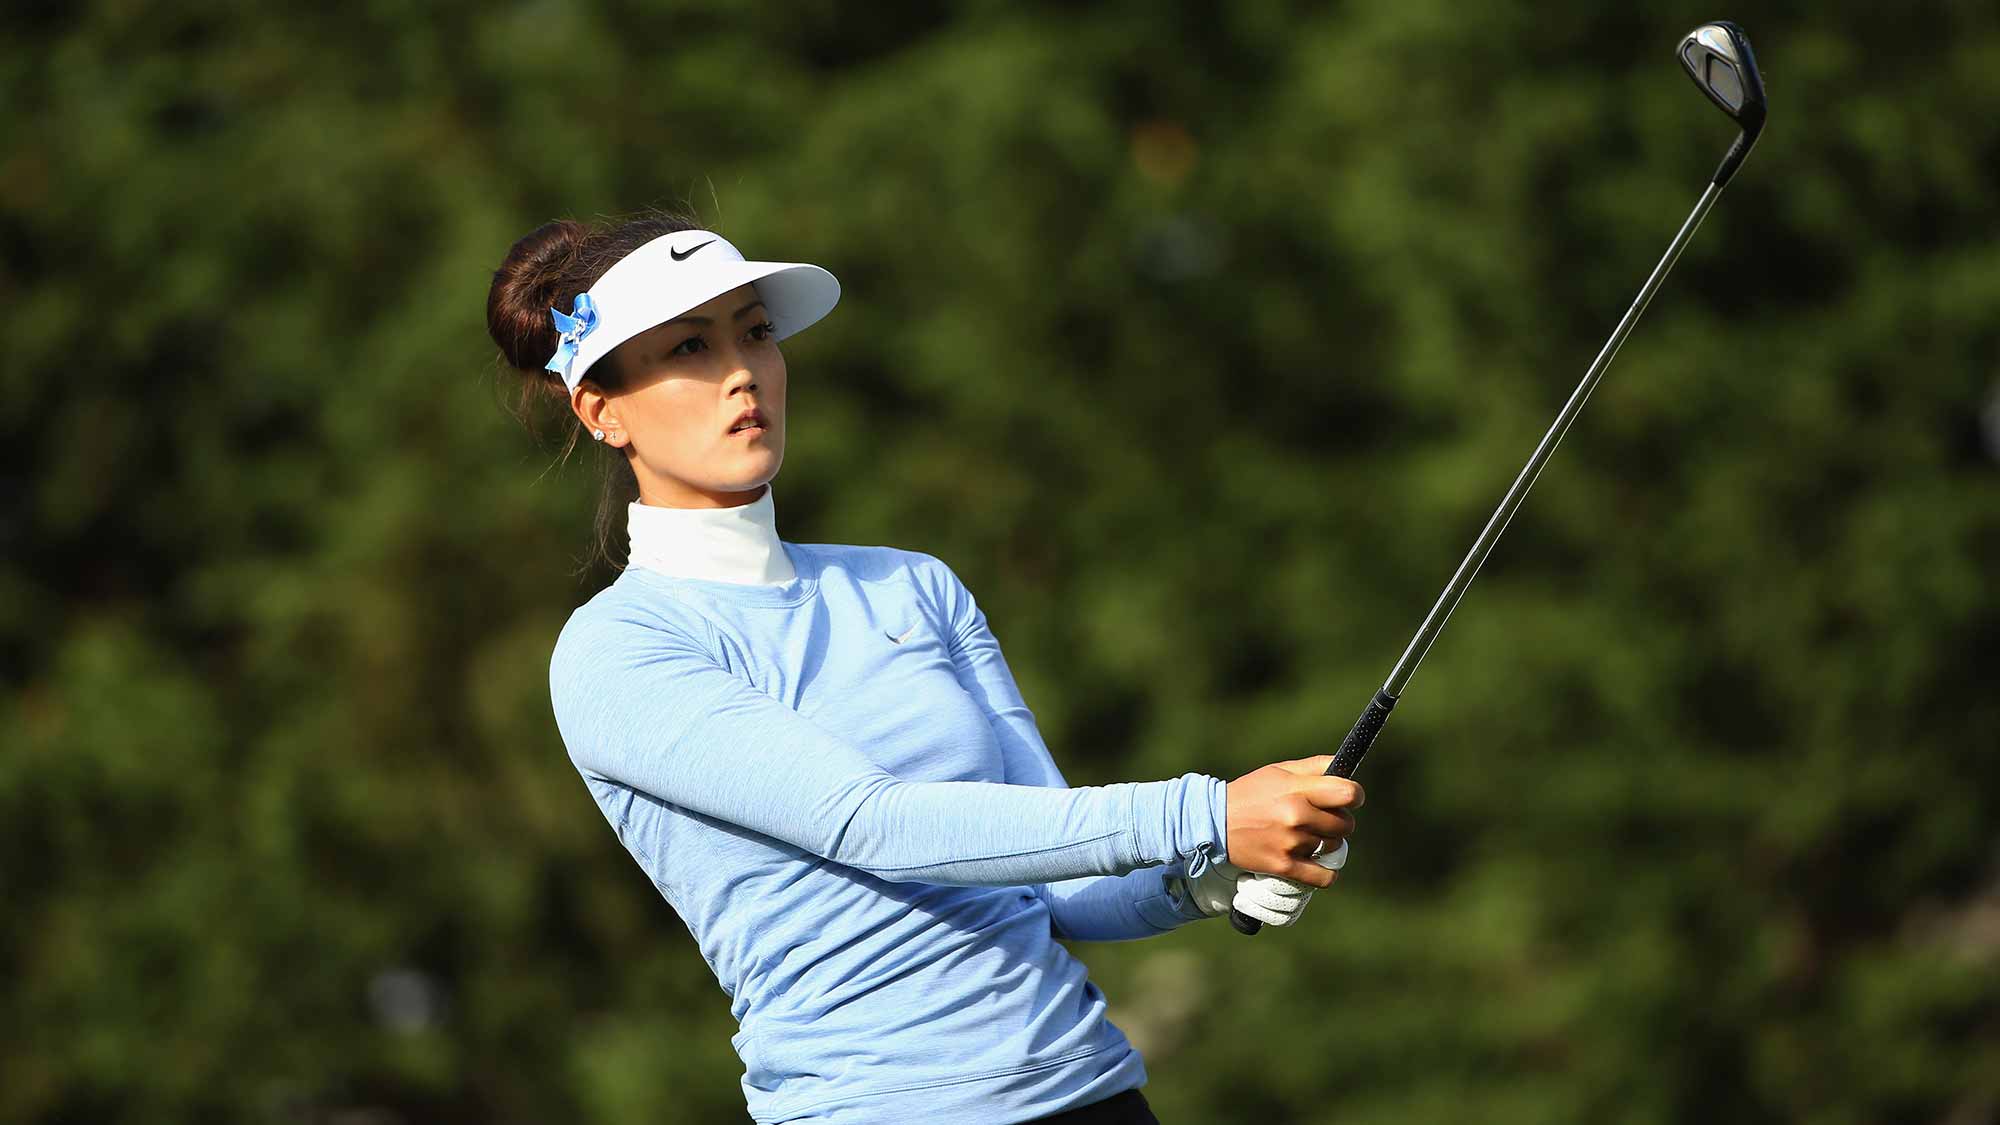 Michelle Wie tees off on the 12th hole during round two of the Swinging Skirts LPGA Classic at Lake Merced Golf Club